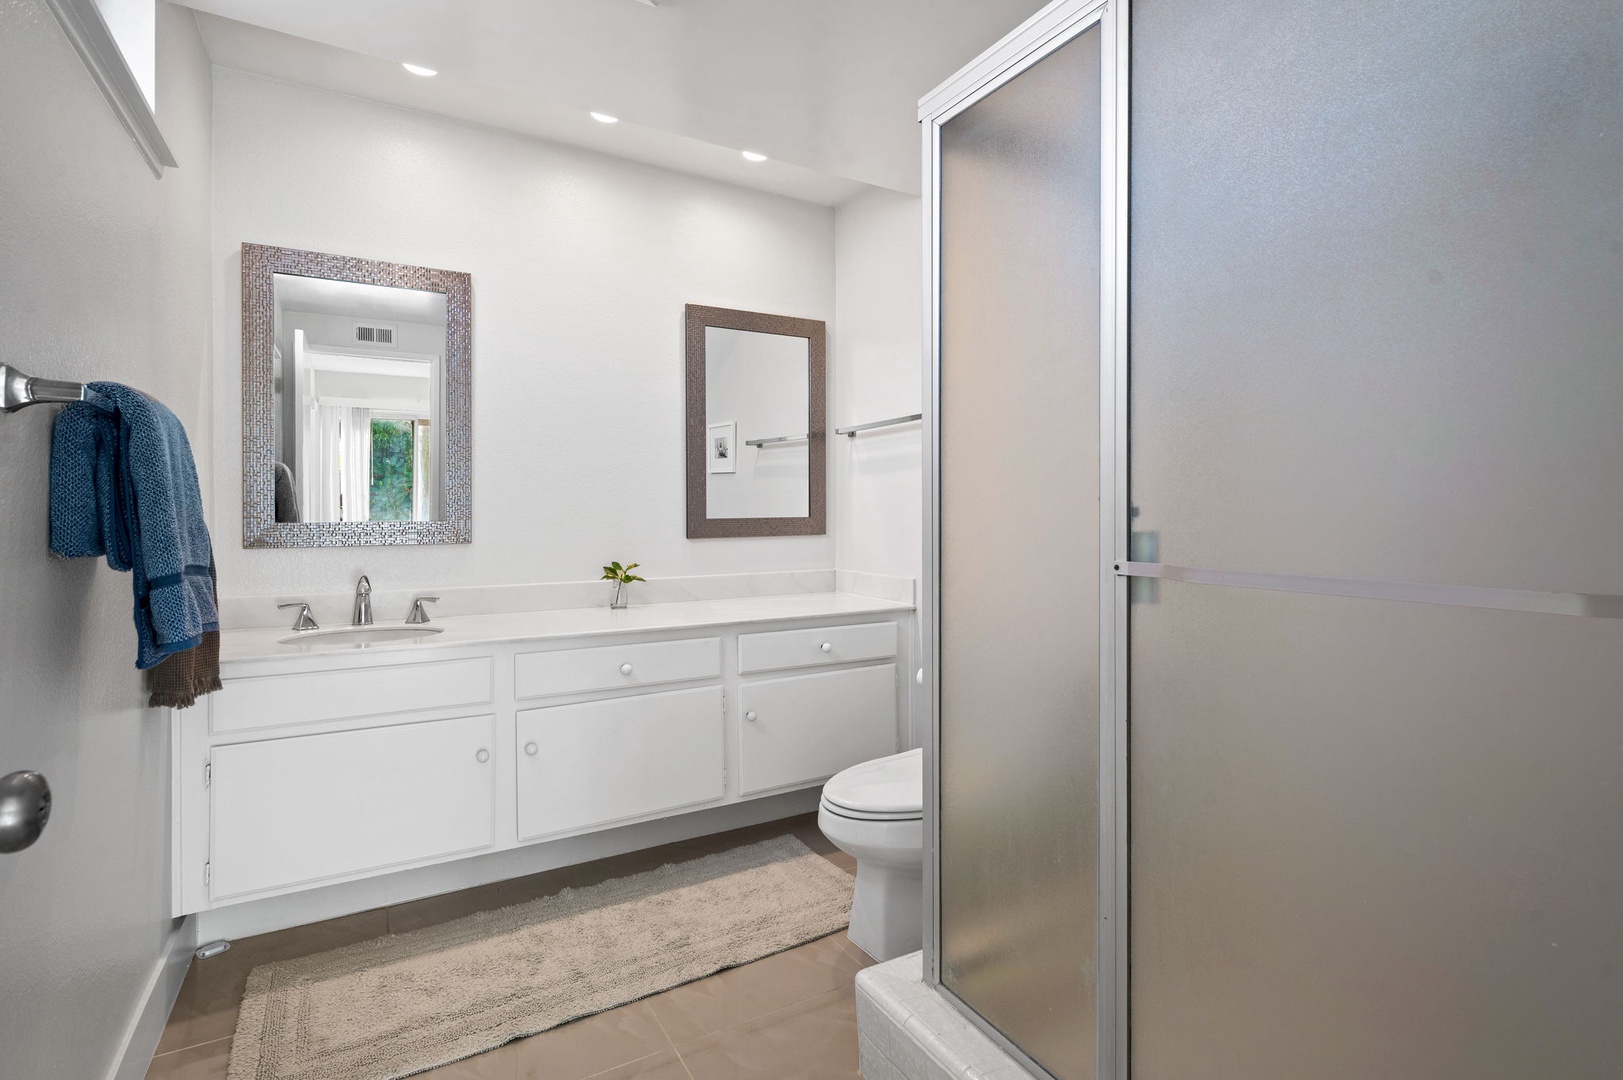 The king en suite boasts a spacious oversized vanity & glass shower